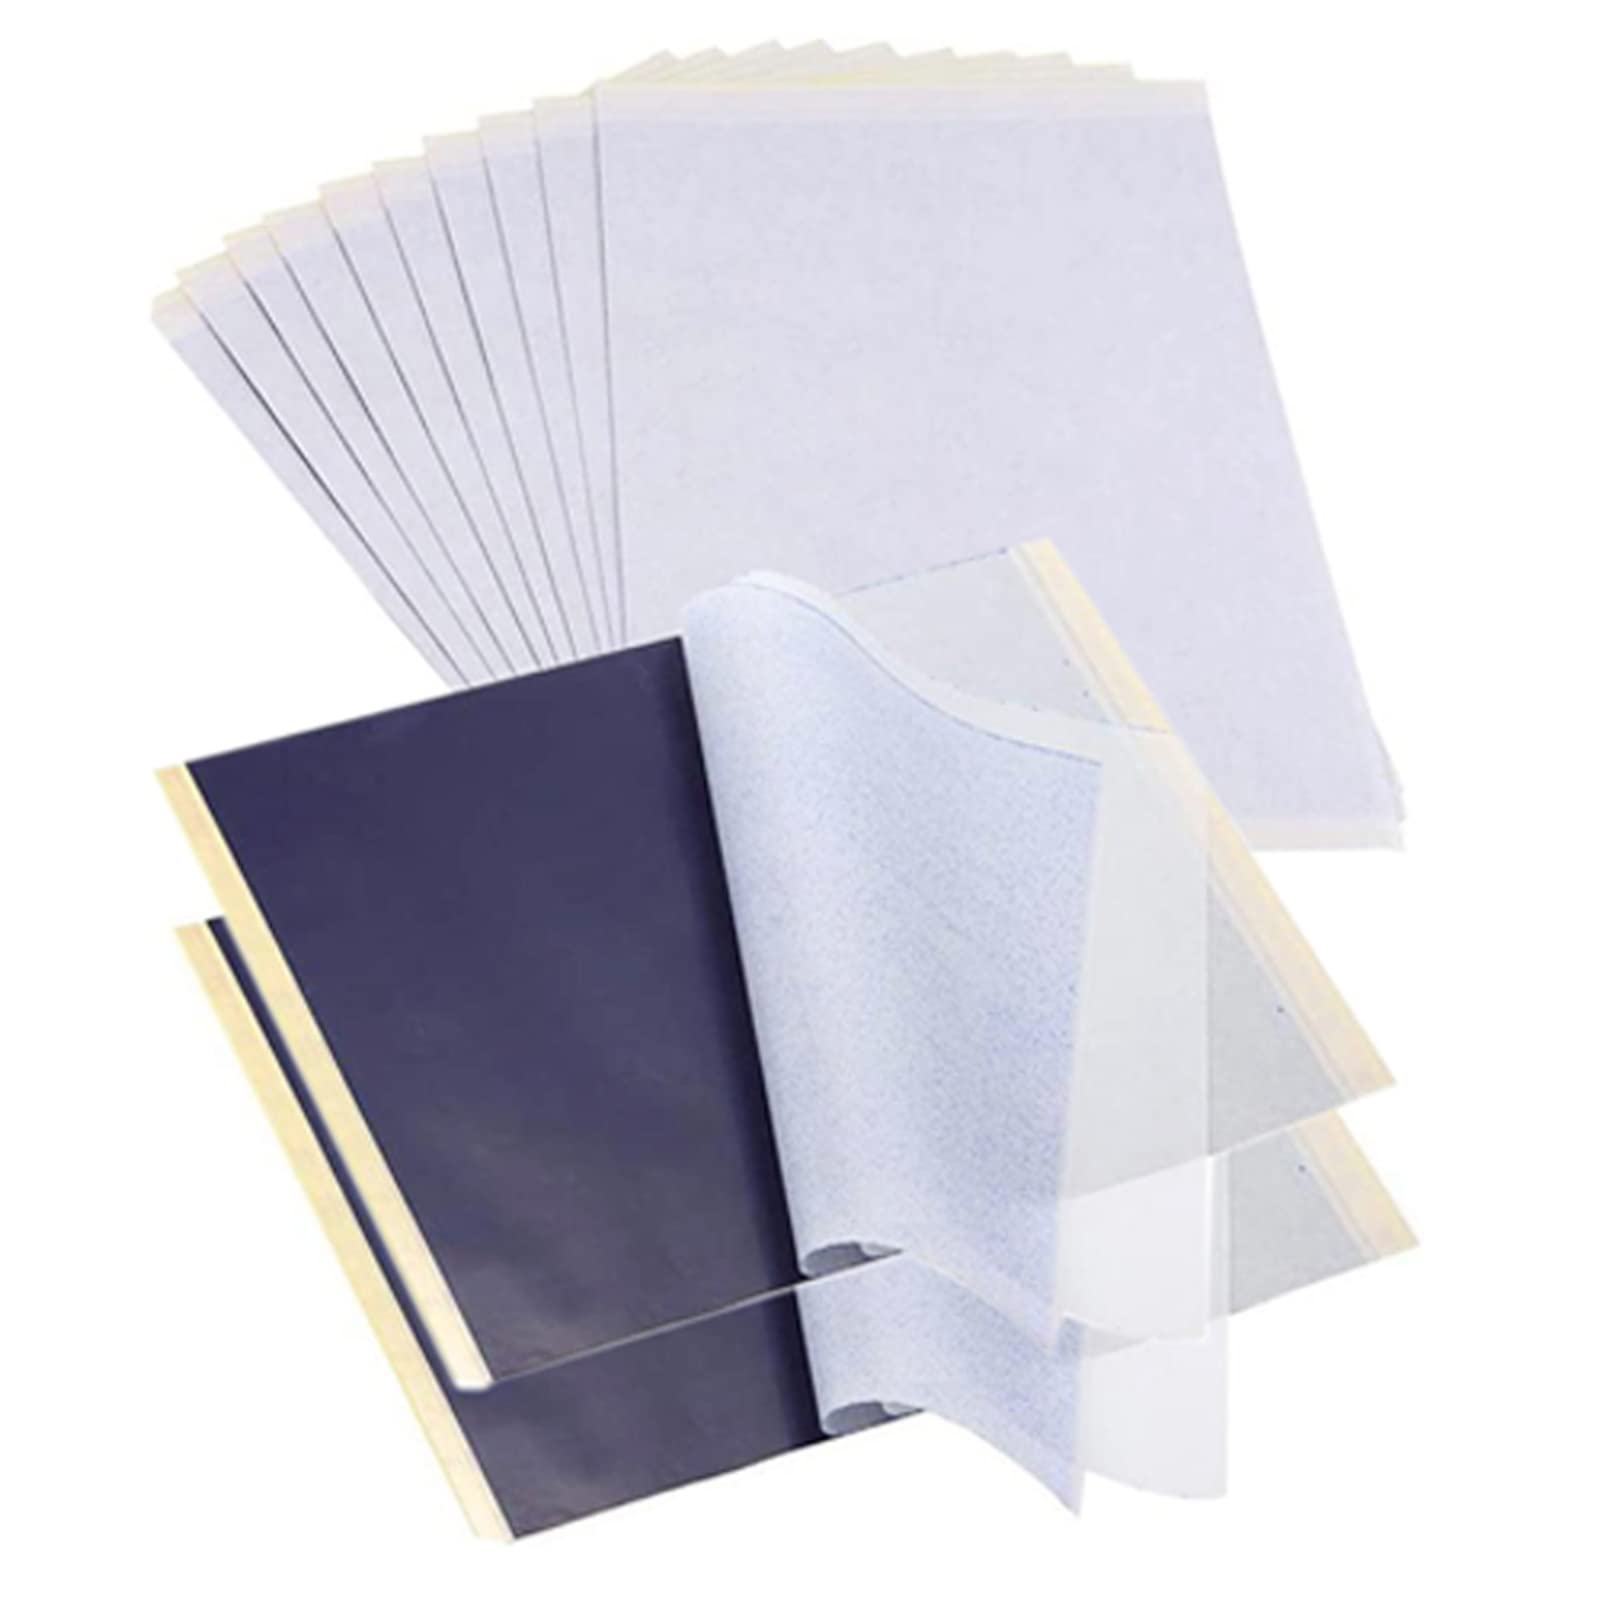 100 Sheets of Carbon Transfer Copy Paper One-side Transfer Paper A4 Carbon  Paper